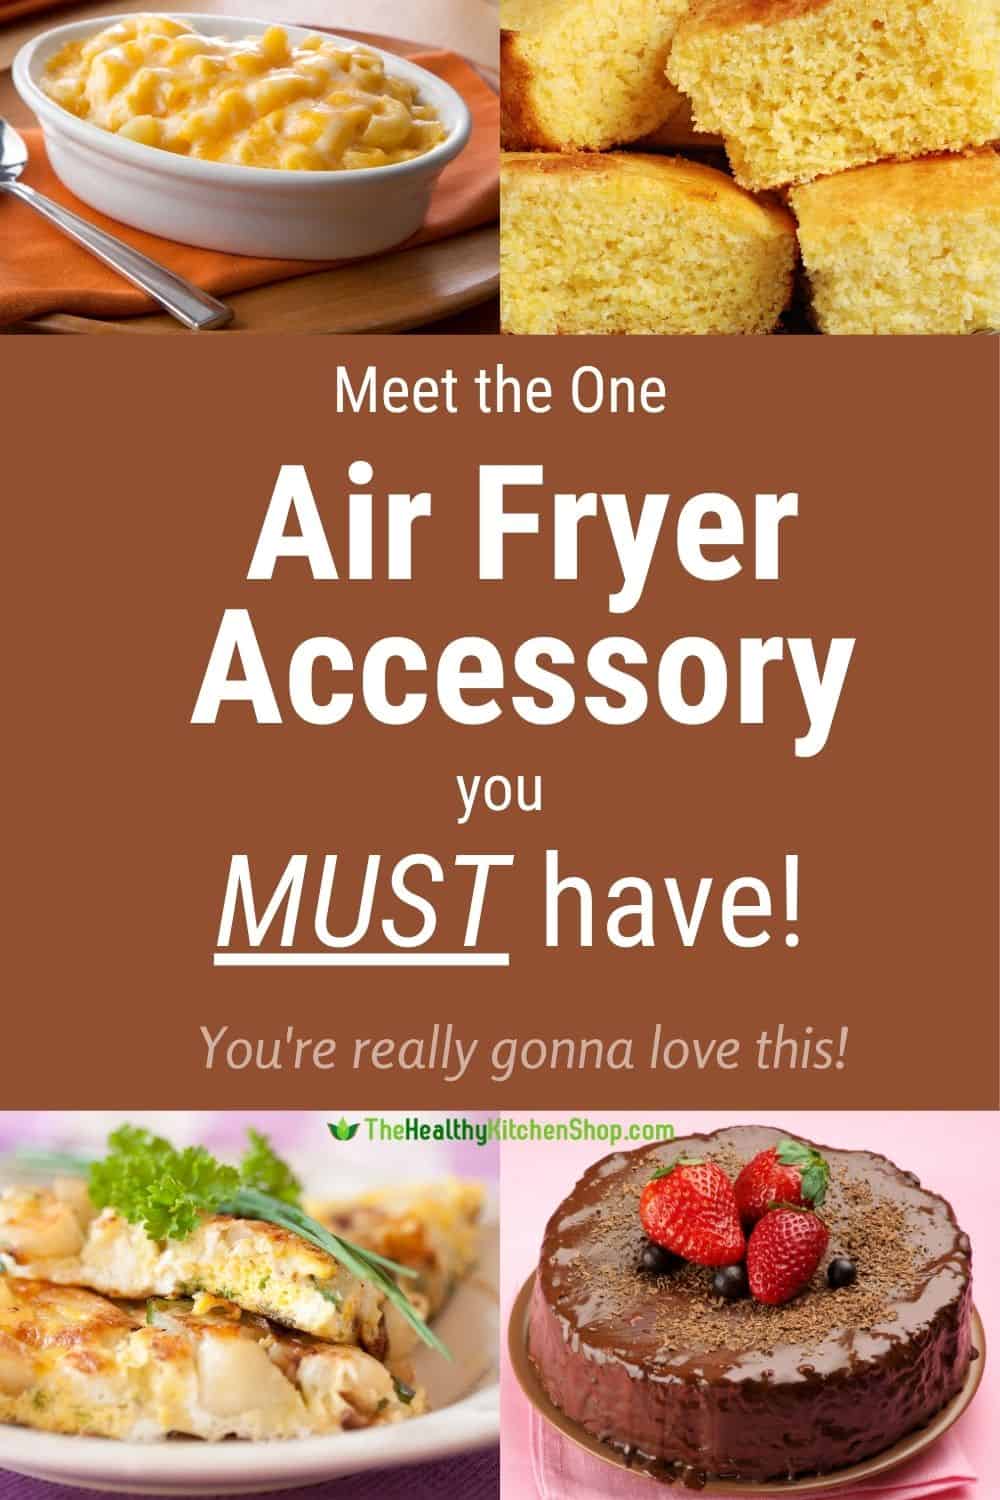 Meet the one air fryer accessory you must have!